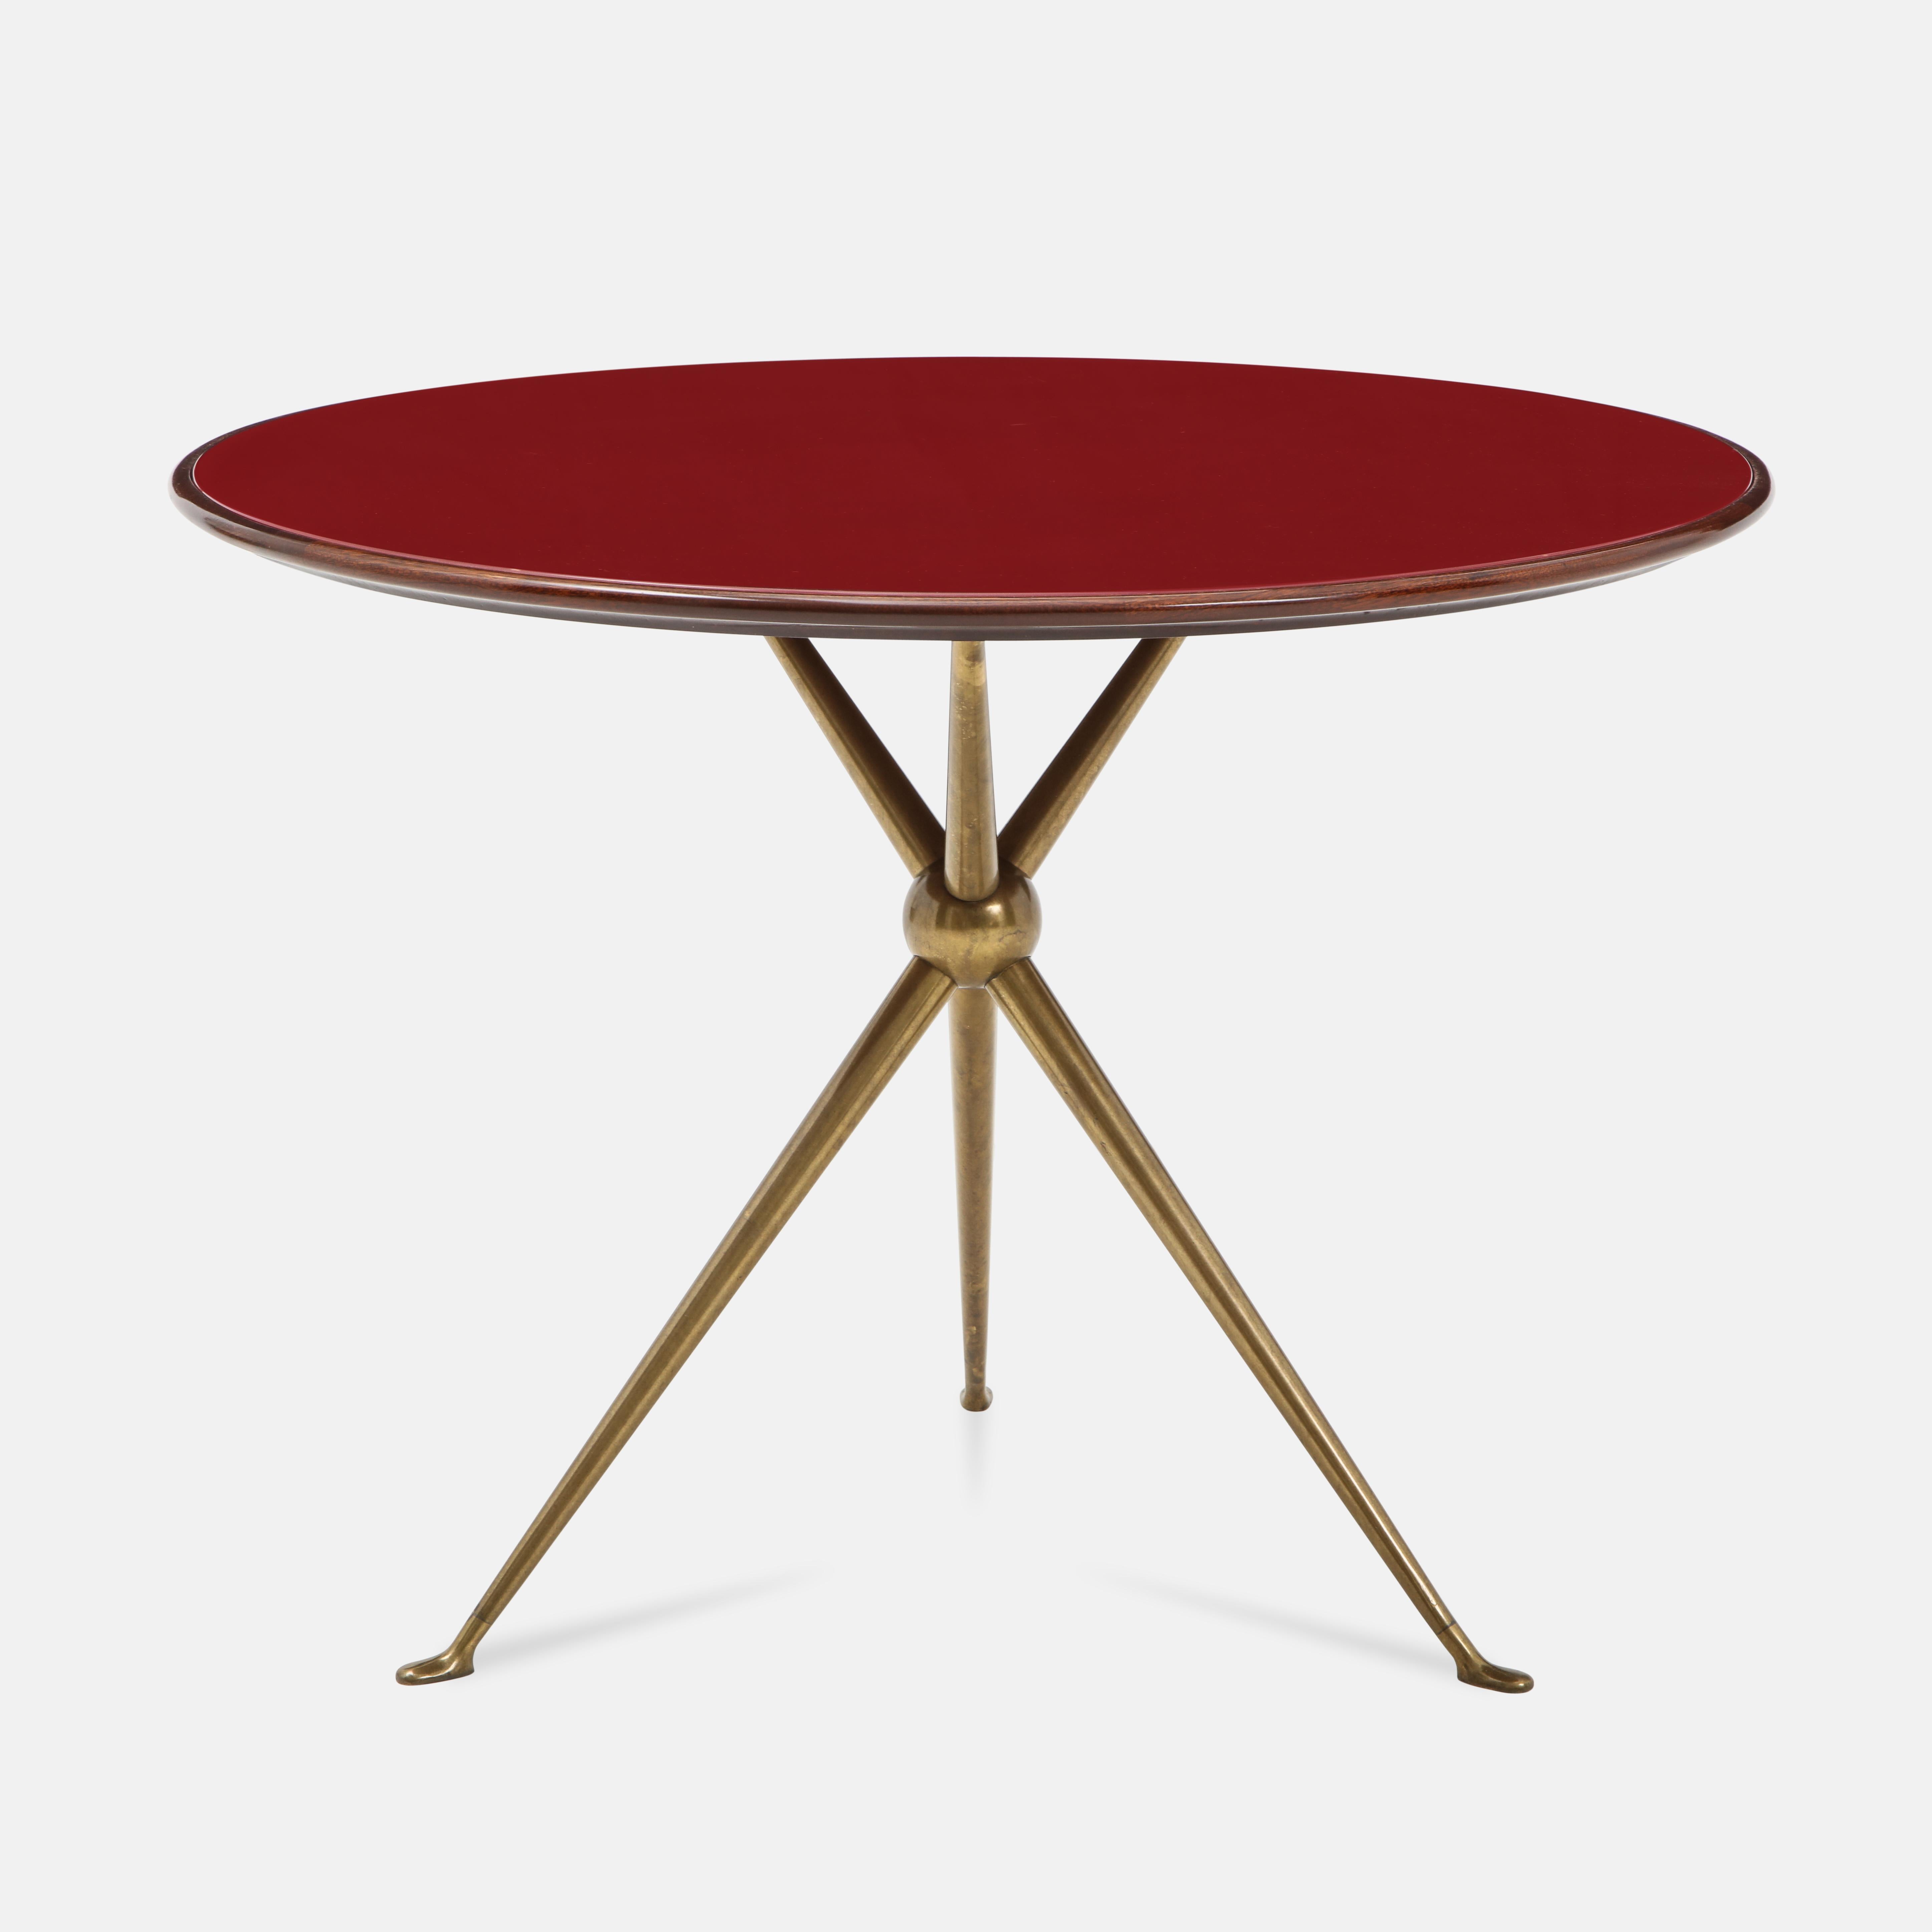 Designed by Osvaldo Borsani and manufactured by Arredamenti Borsani Varedo, Milan in 1940s, rare matched pair of round side tables with wood top and inset reverse painted deep red glass atop gilt brass tripod base. Beautifully modern lines and